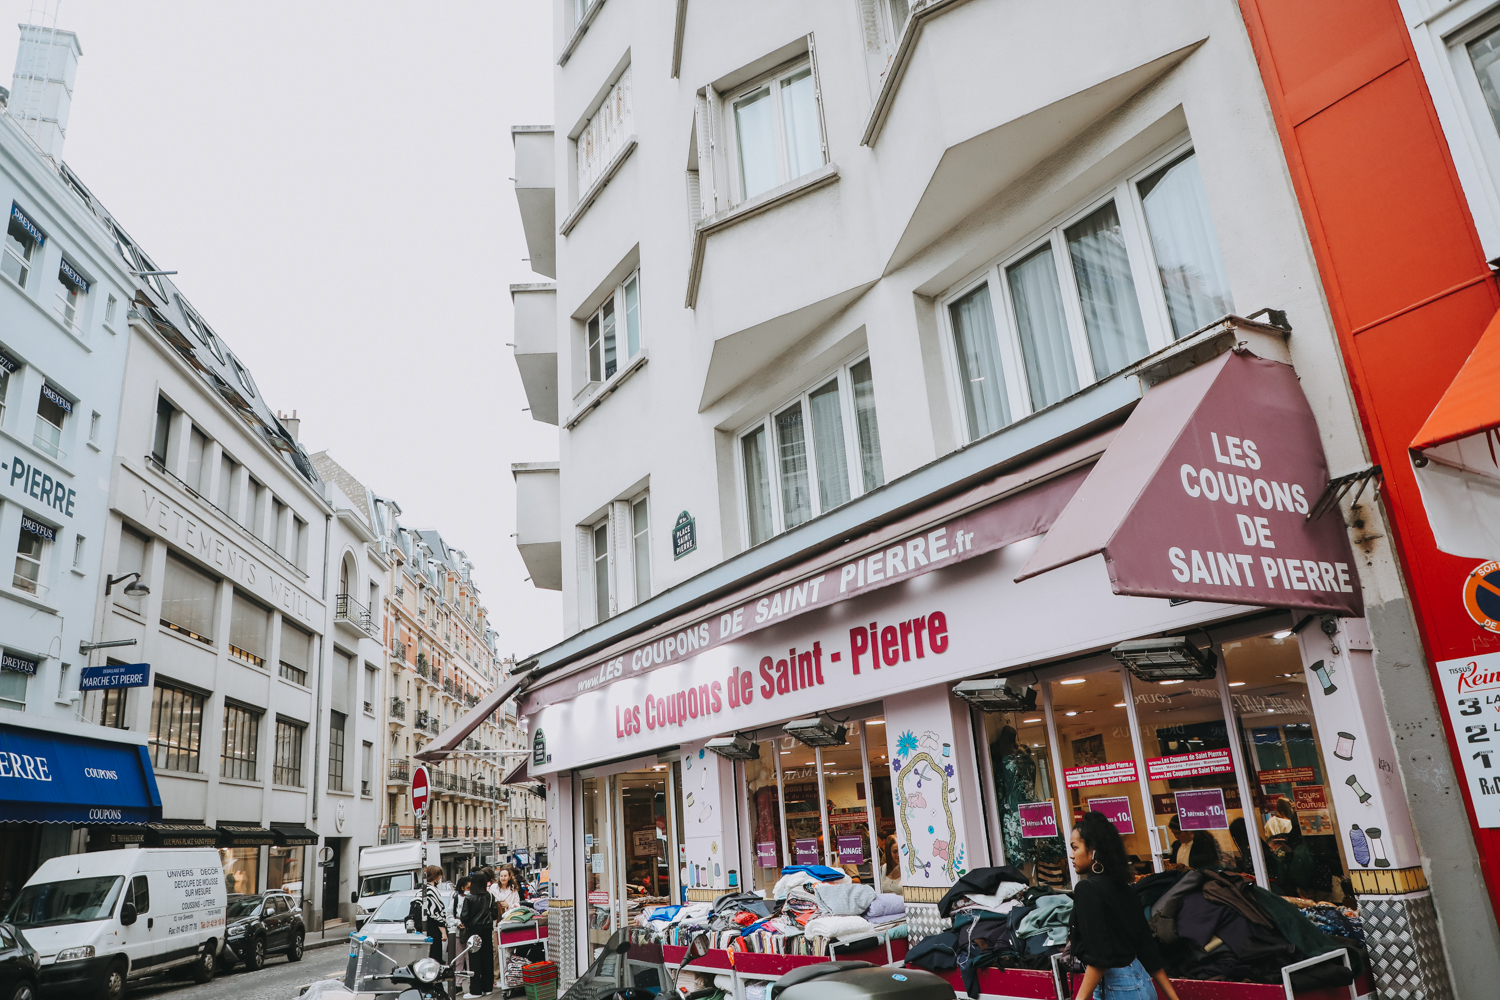 Your Guide to Luxury Shopping in Paris